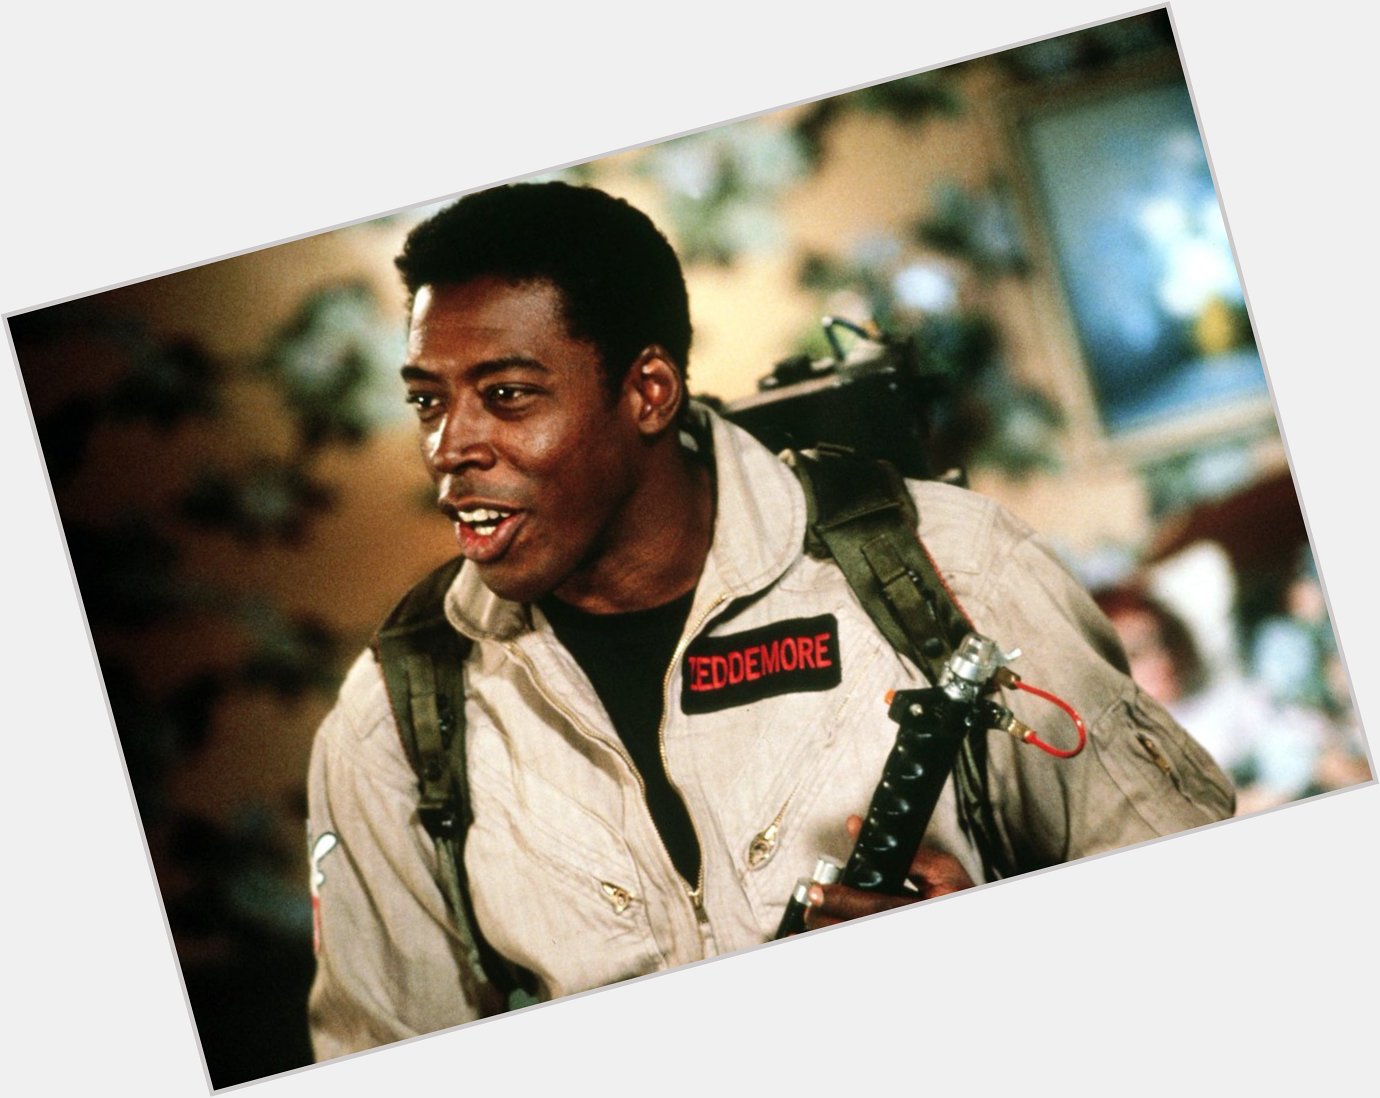 Happy Birthday Ernie Hudson who you going to call 